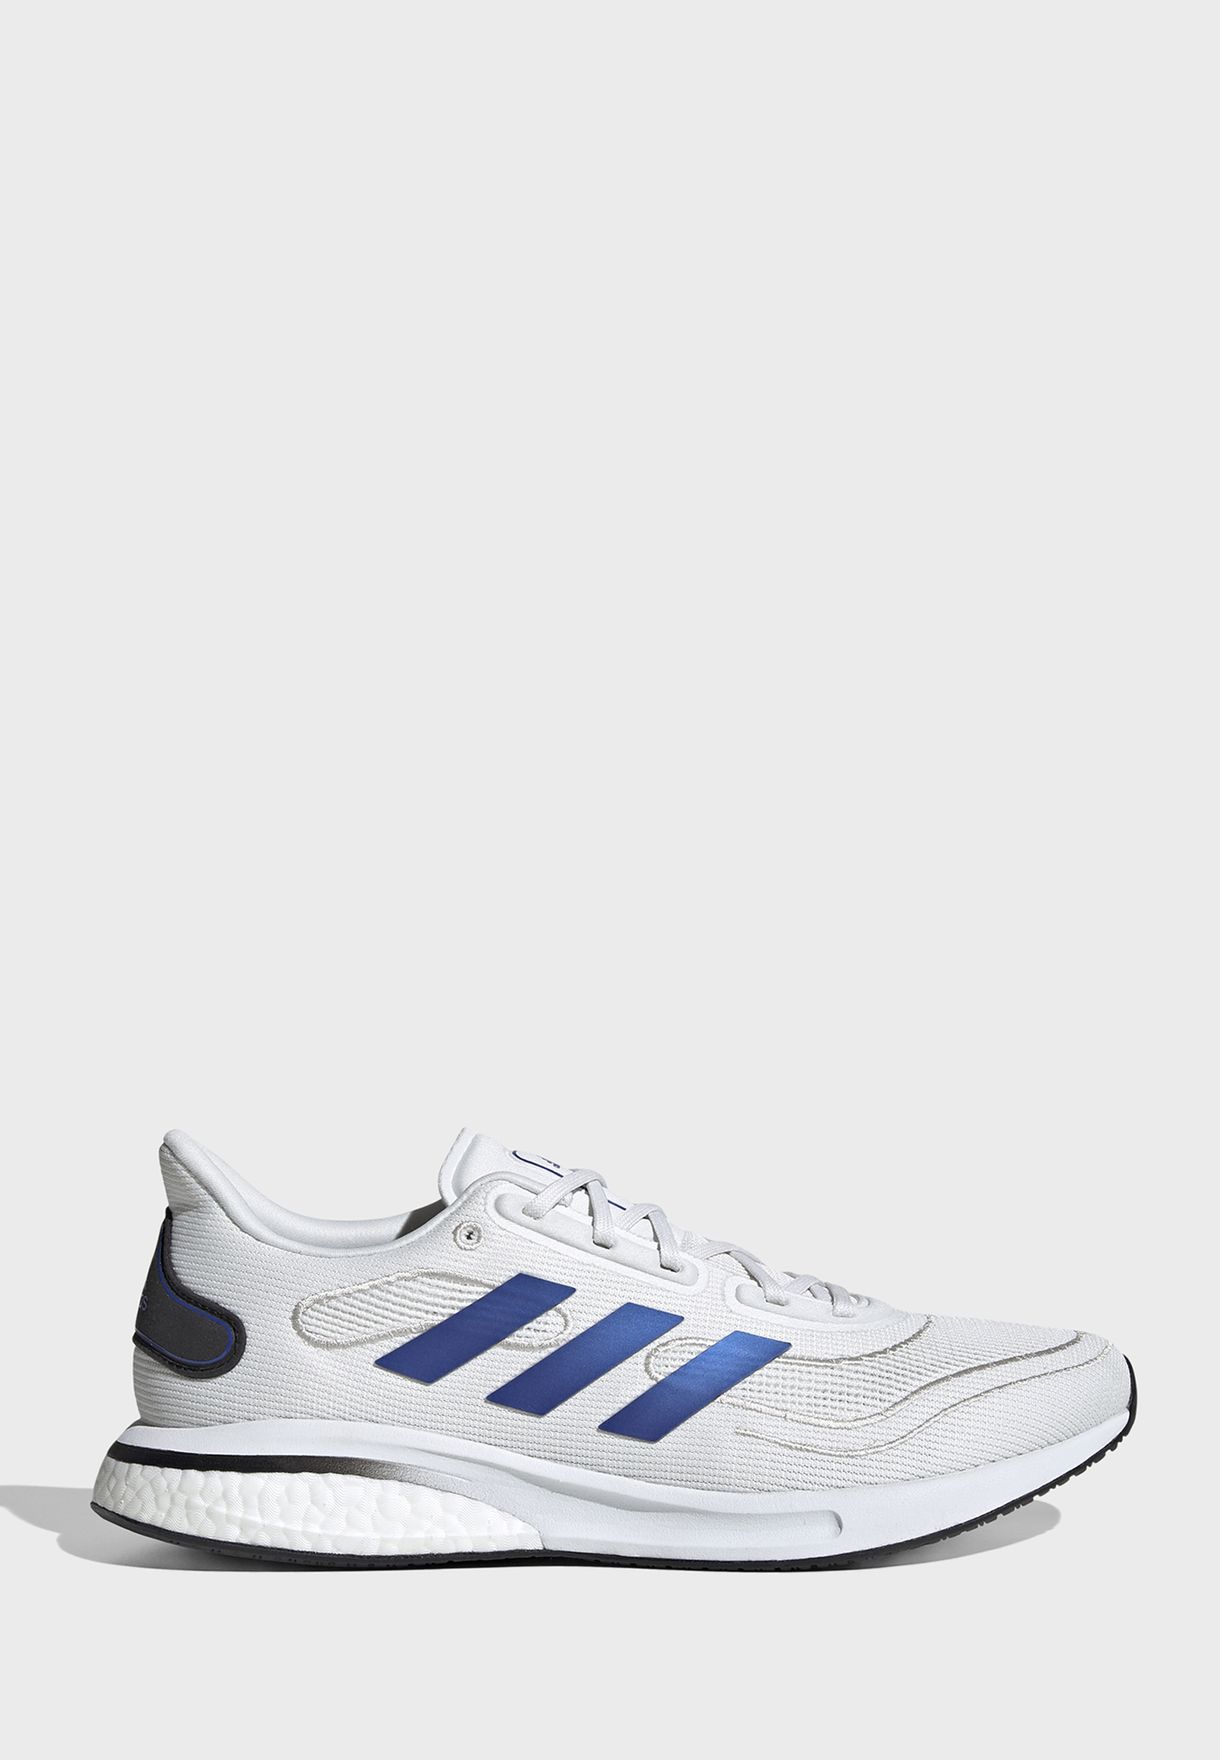 adidas white sports shoes for mens